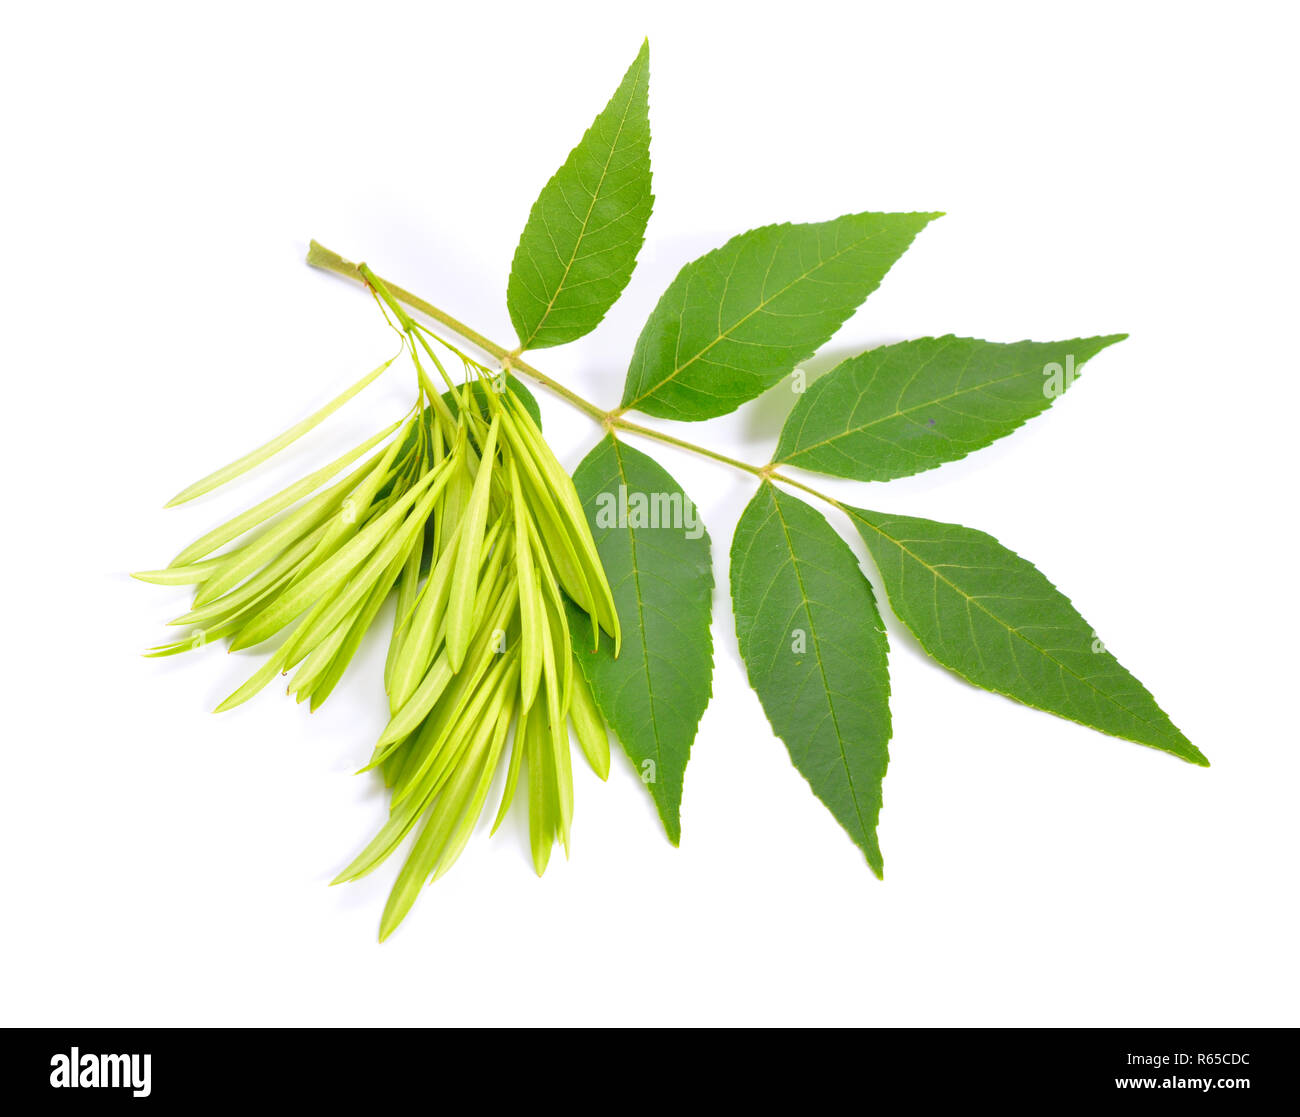 Fraxinus excelsior, known as the ash, or European ash. Green leaves with seeds. ISolated on white. Stock Photo